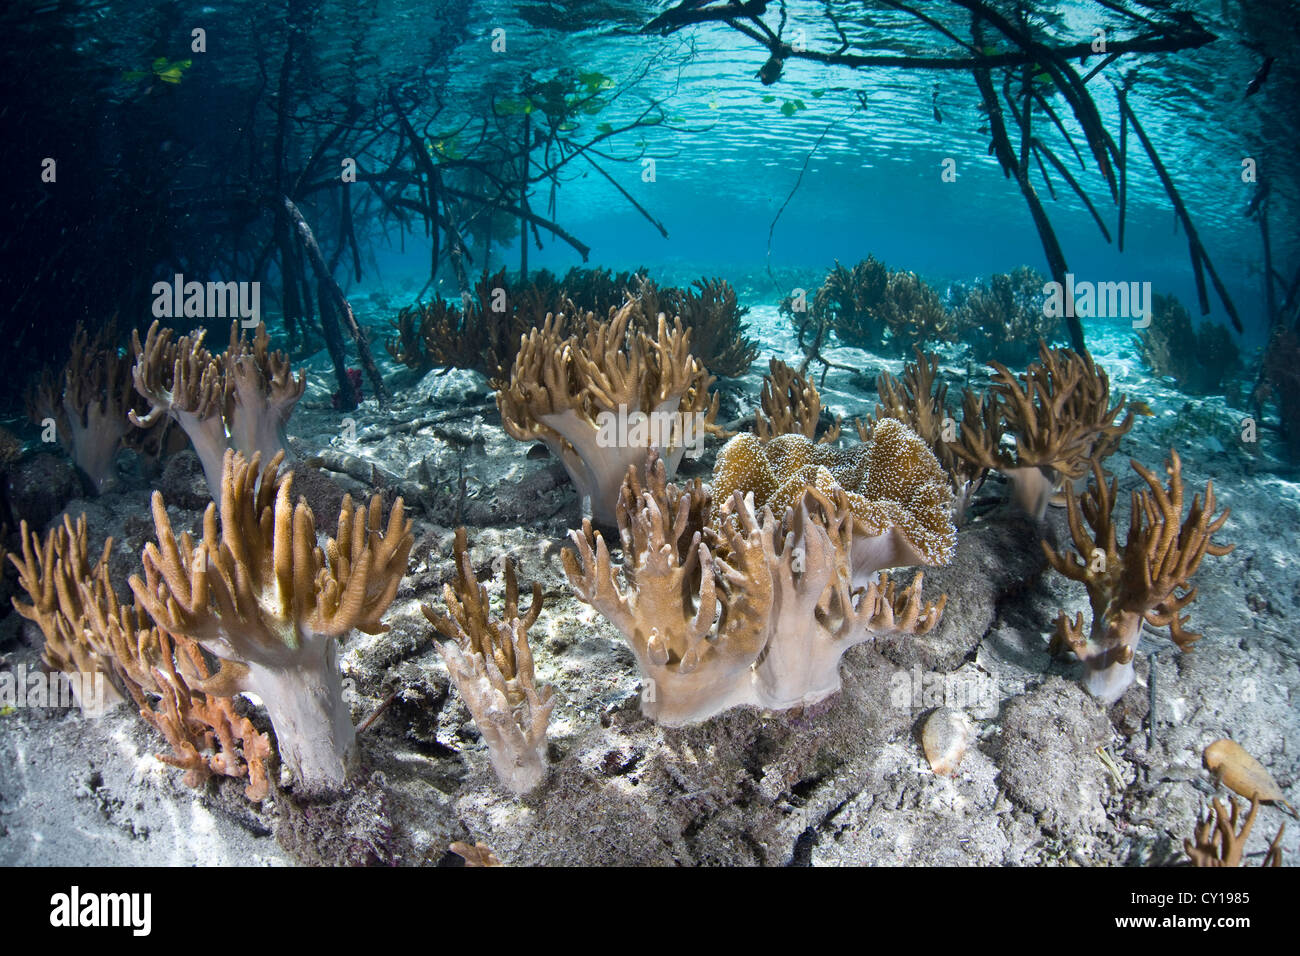 Leather Soft Corals in Mangrove Forest, Sinularia sp., Raja Ampat, West Papua, Indonesia Stock Photo